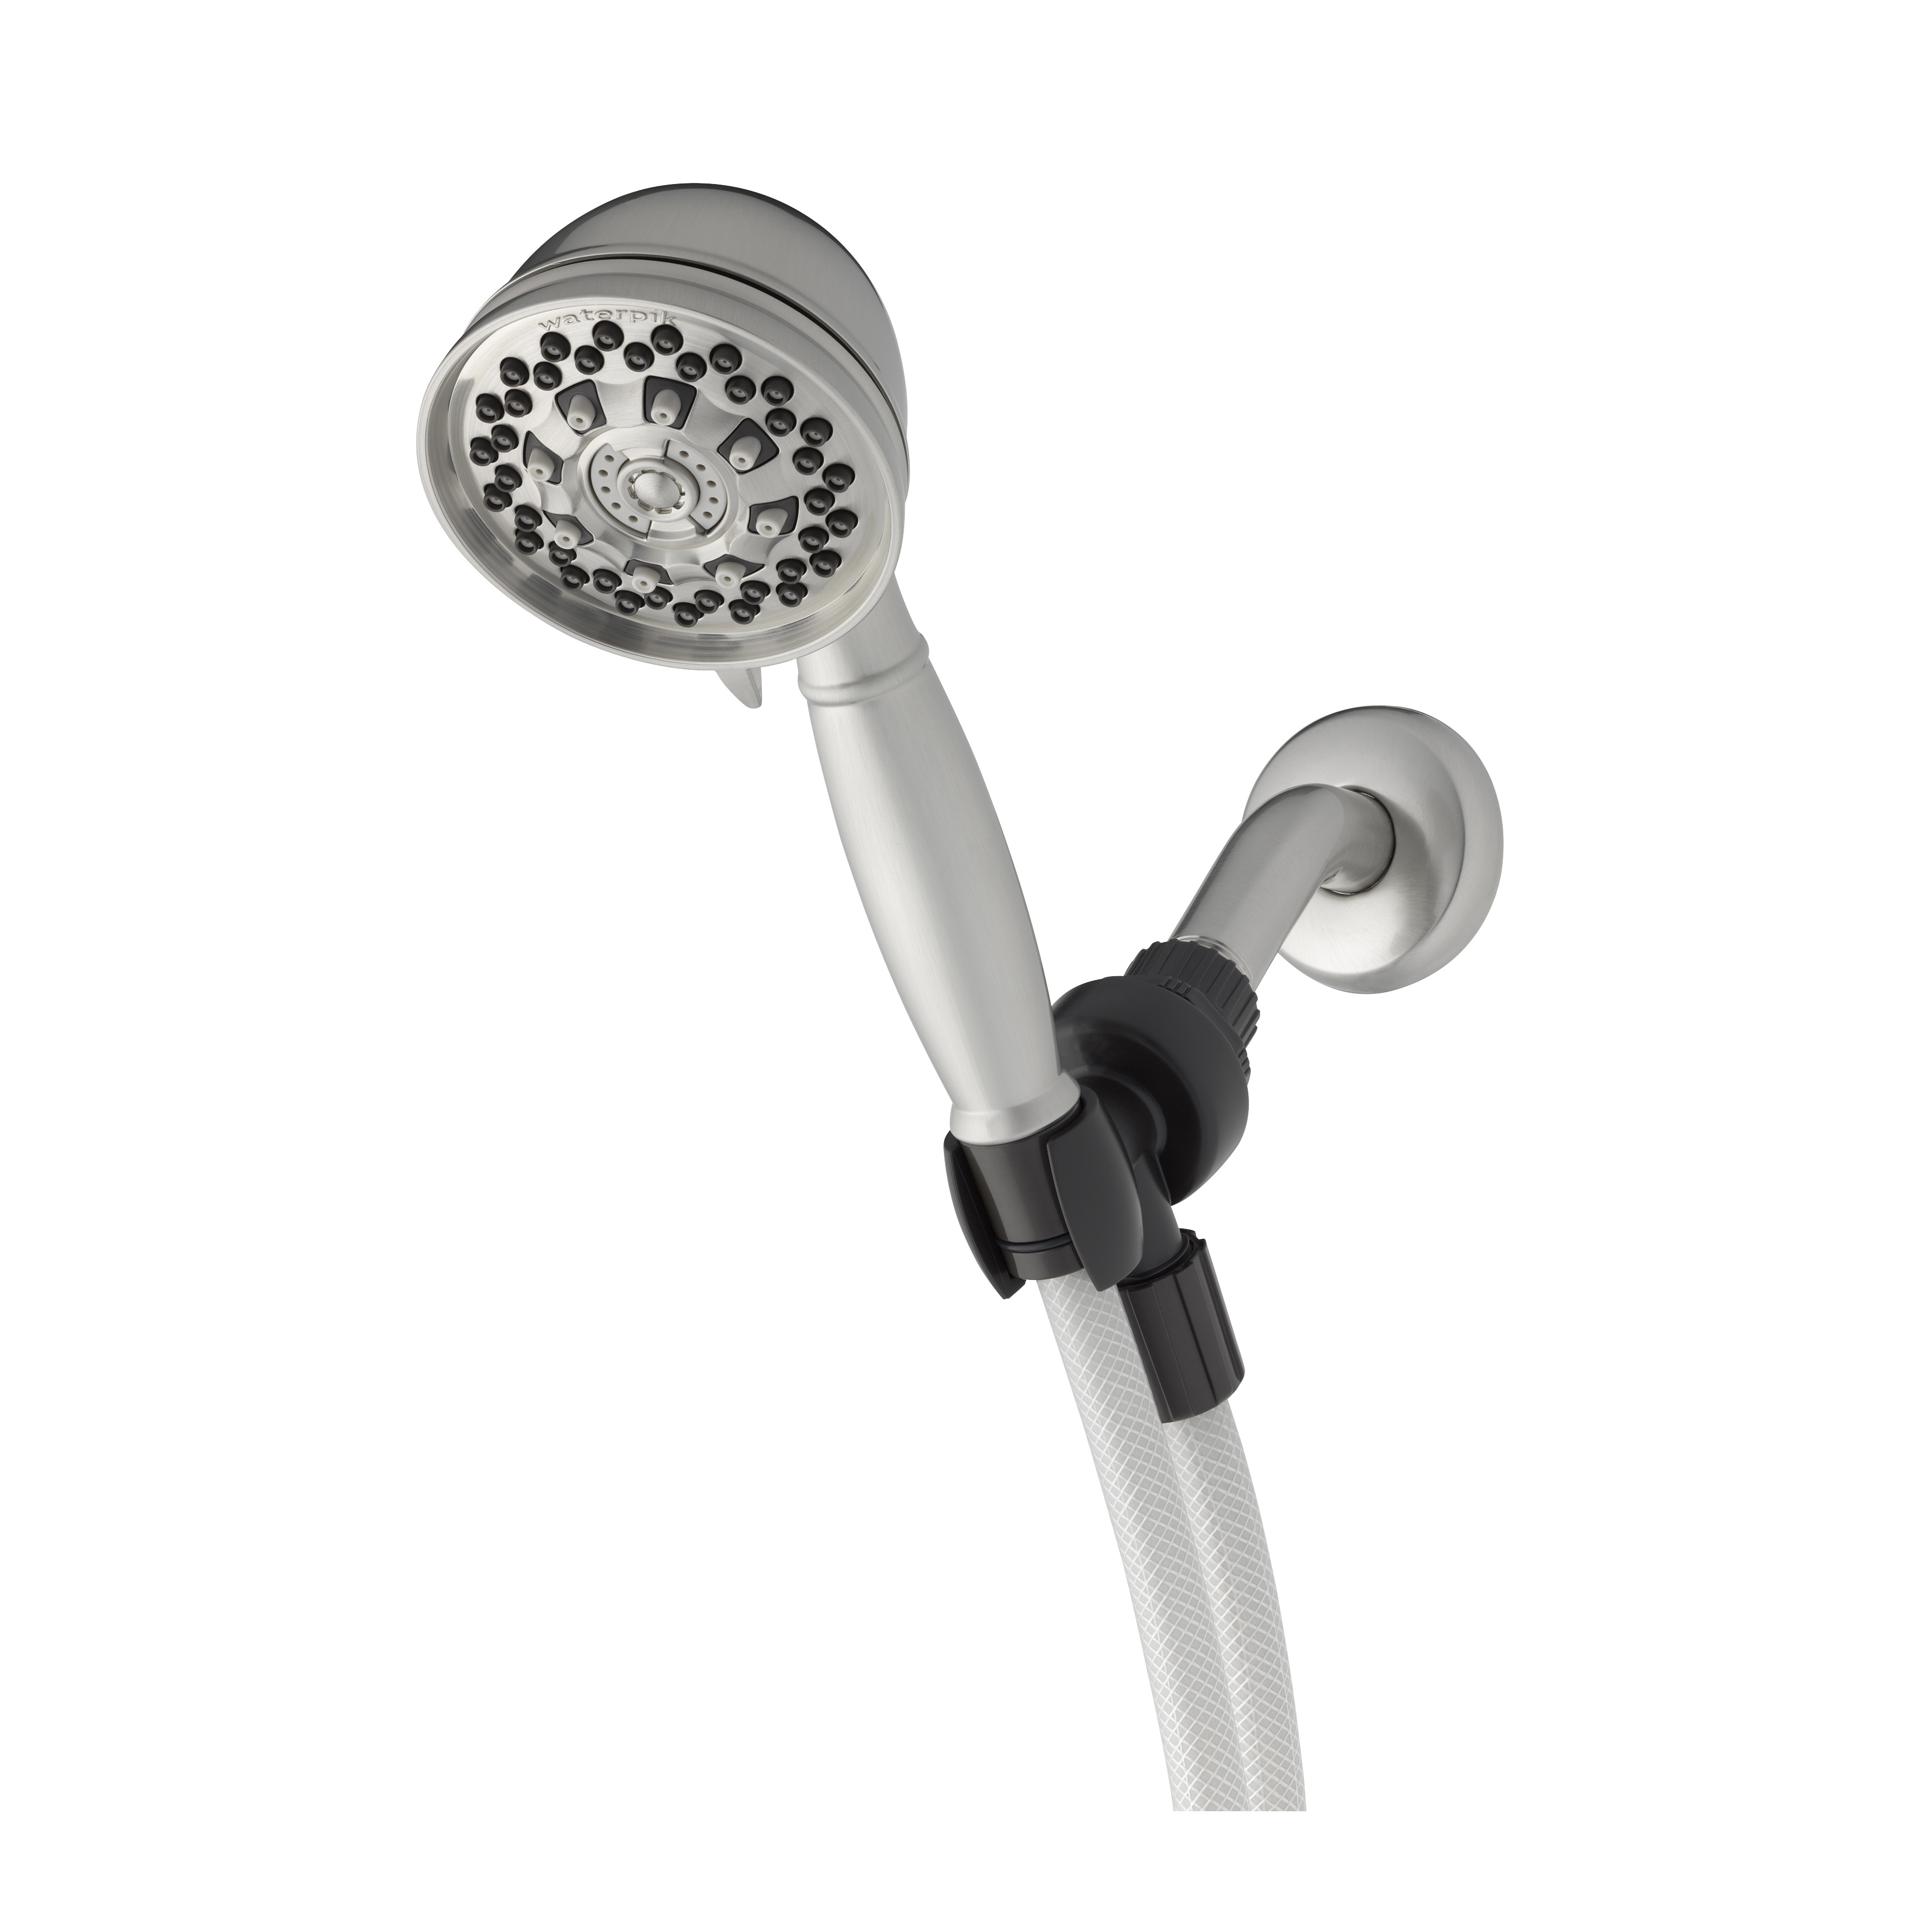 XAT-613E Fixed Shower Head, Round, 1.8 gpm, 1/2 in Connection, ABS, Chrome, 3-1/2 in Dia, 4-1/8 in W